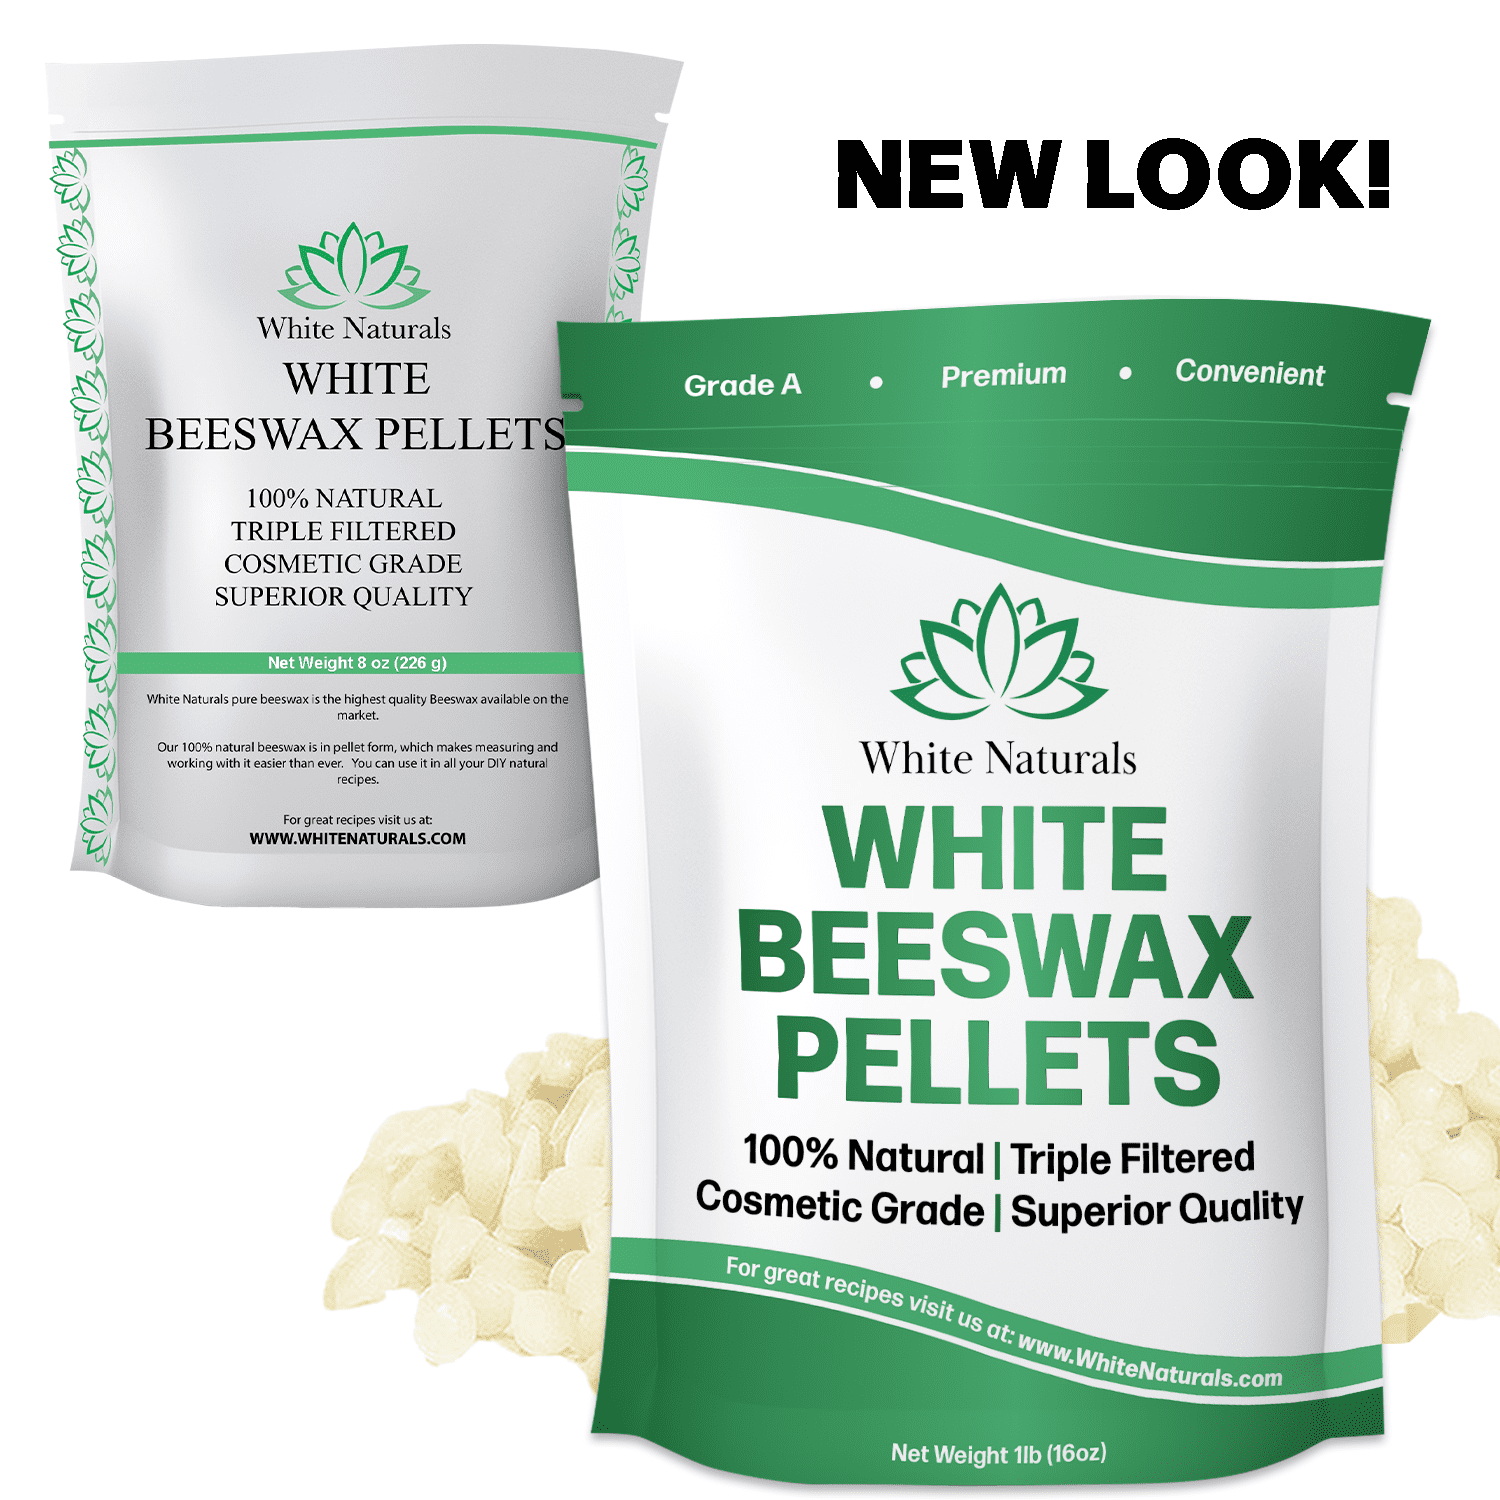 Inesscents Organic Beeswax Pellets, 8 oz.